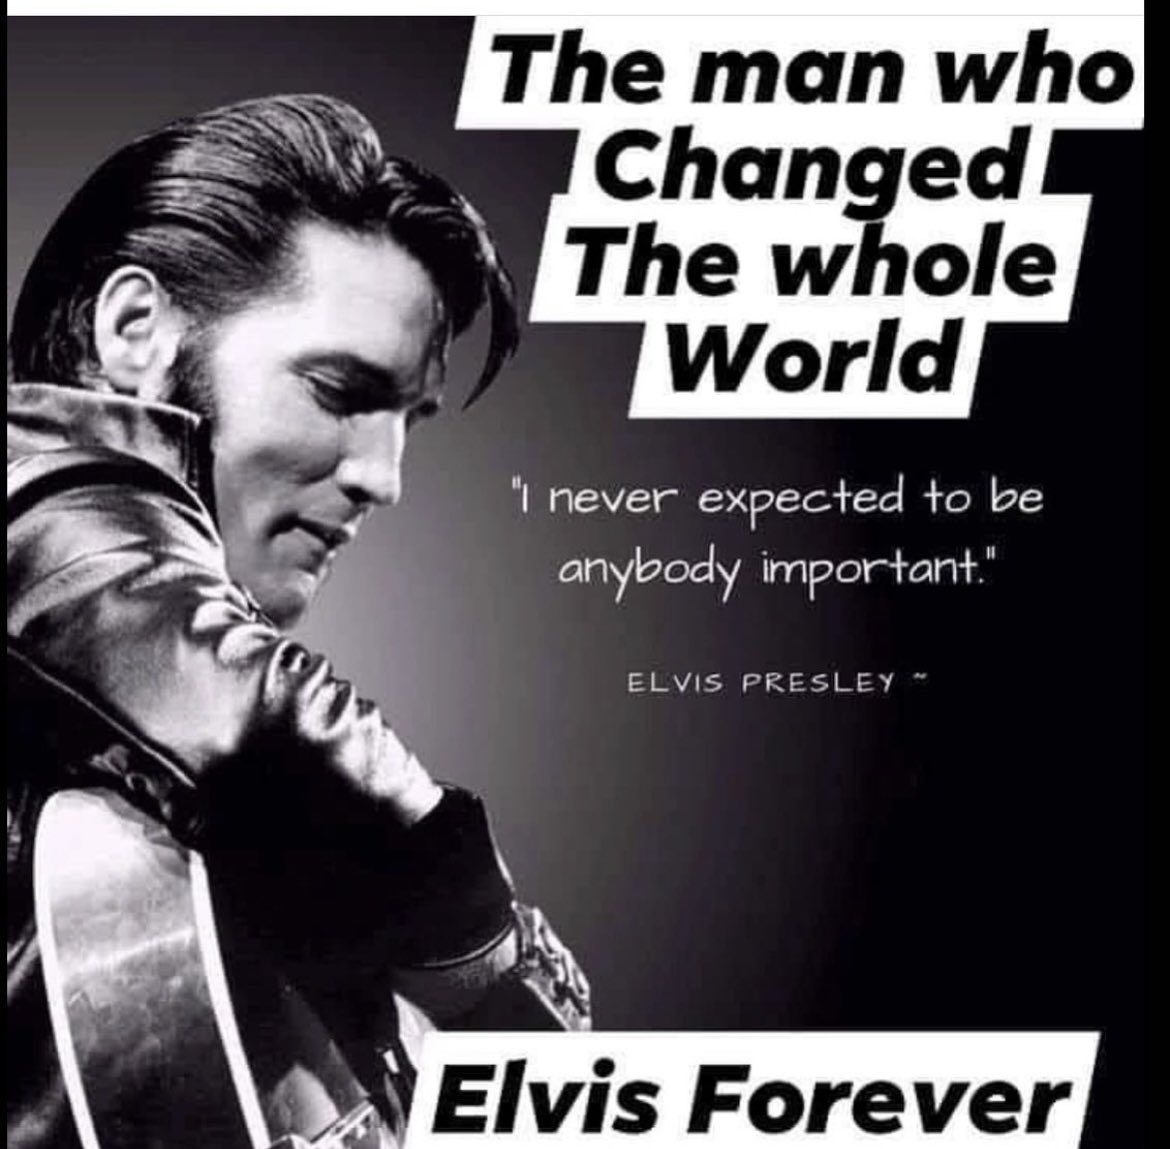 Totally Elvis forever! Good morning, E fam! Today is the big party, and I’m running around like a chicken with its head cut off! Please pray it all goes well! I hope everyone has a wonderful day!!! Love you all for your friendships! 😘❤️🥰 #TCB #Elvisfamily